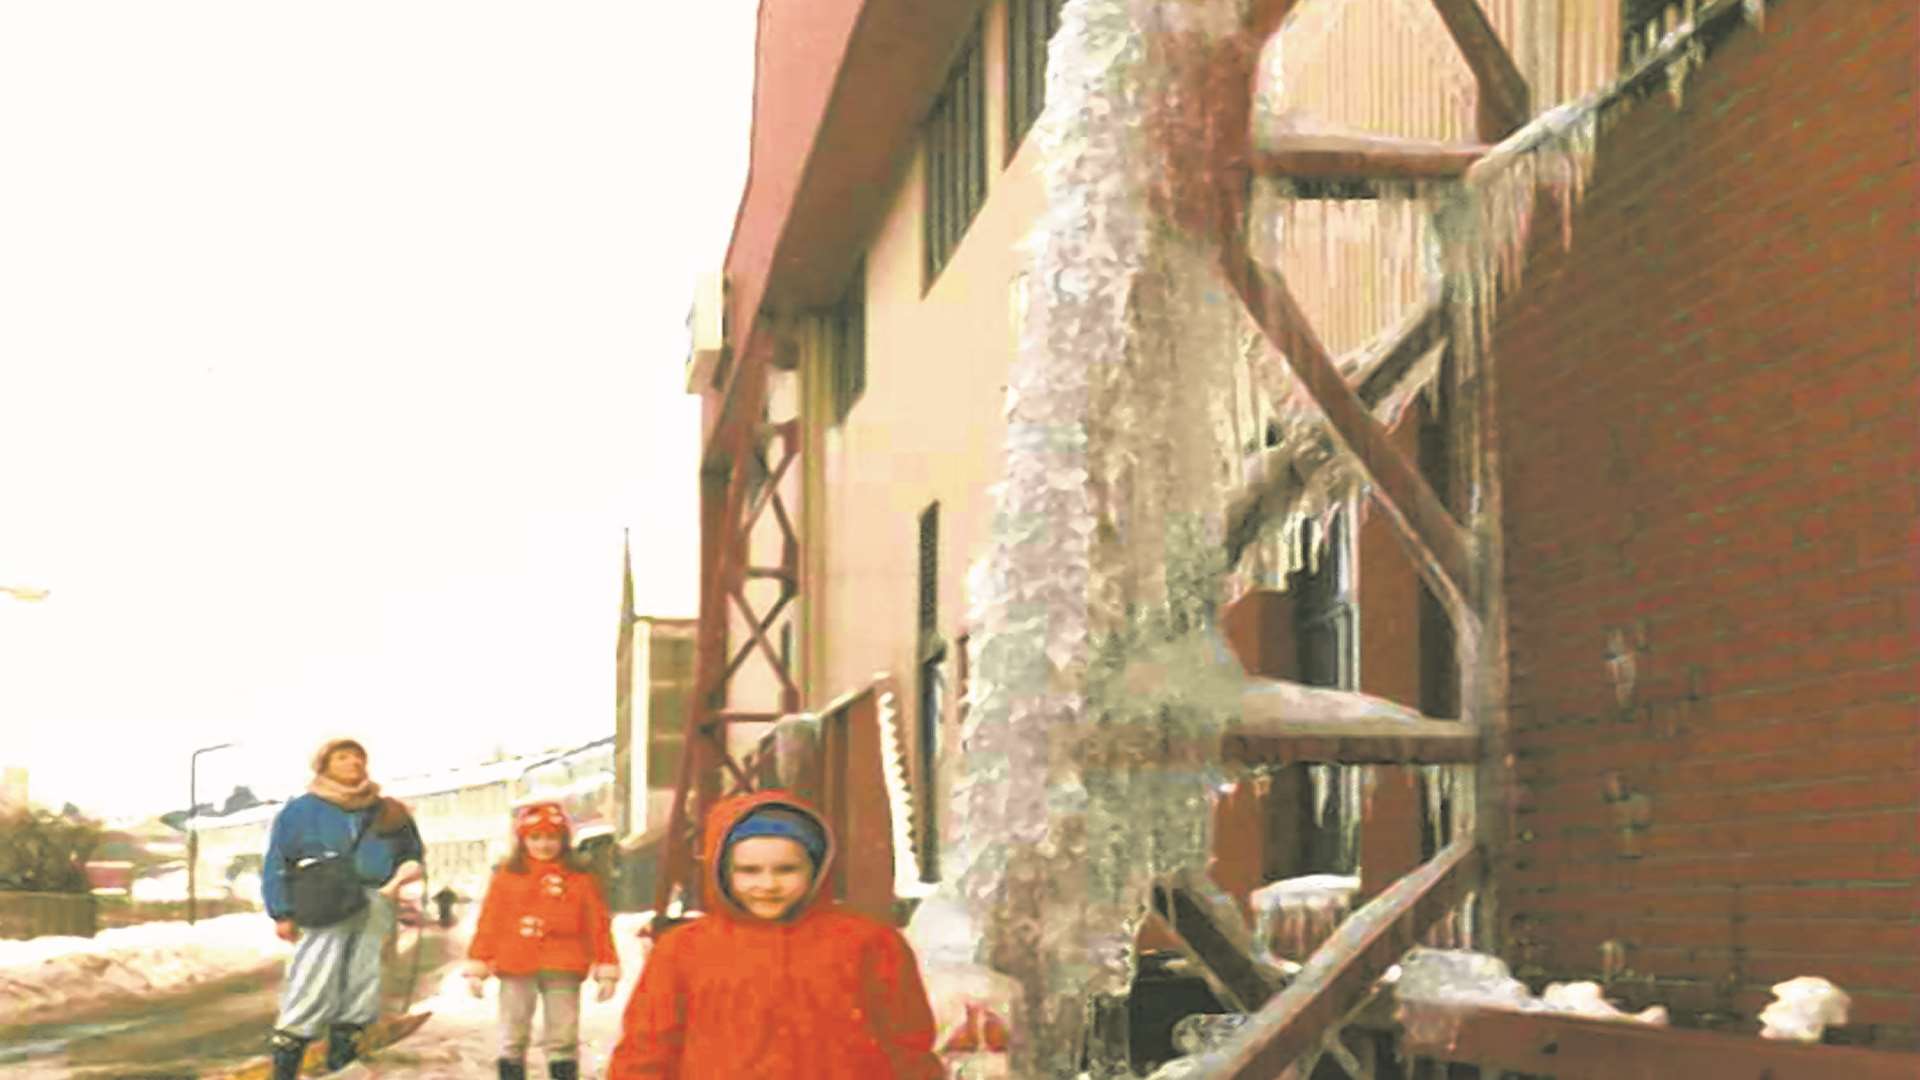 Andrea Everett, now Waite, admires a giant icicle in Rochester